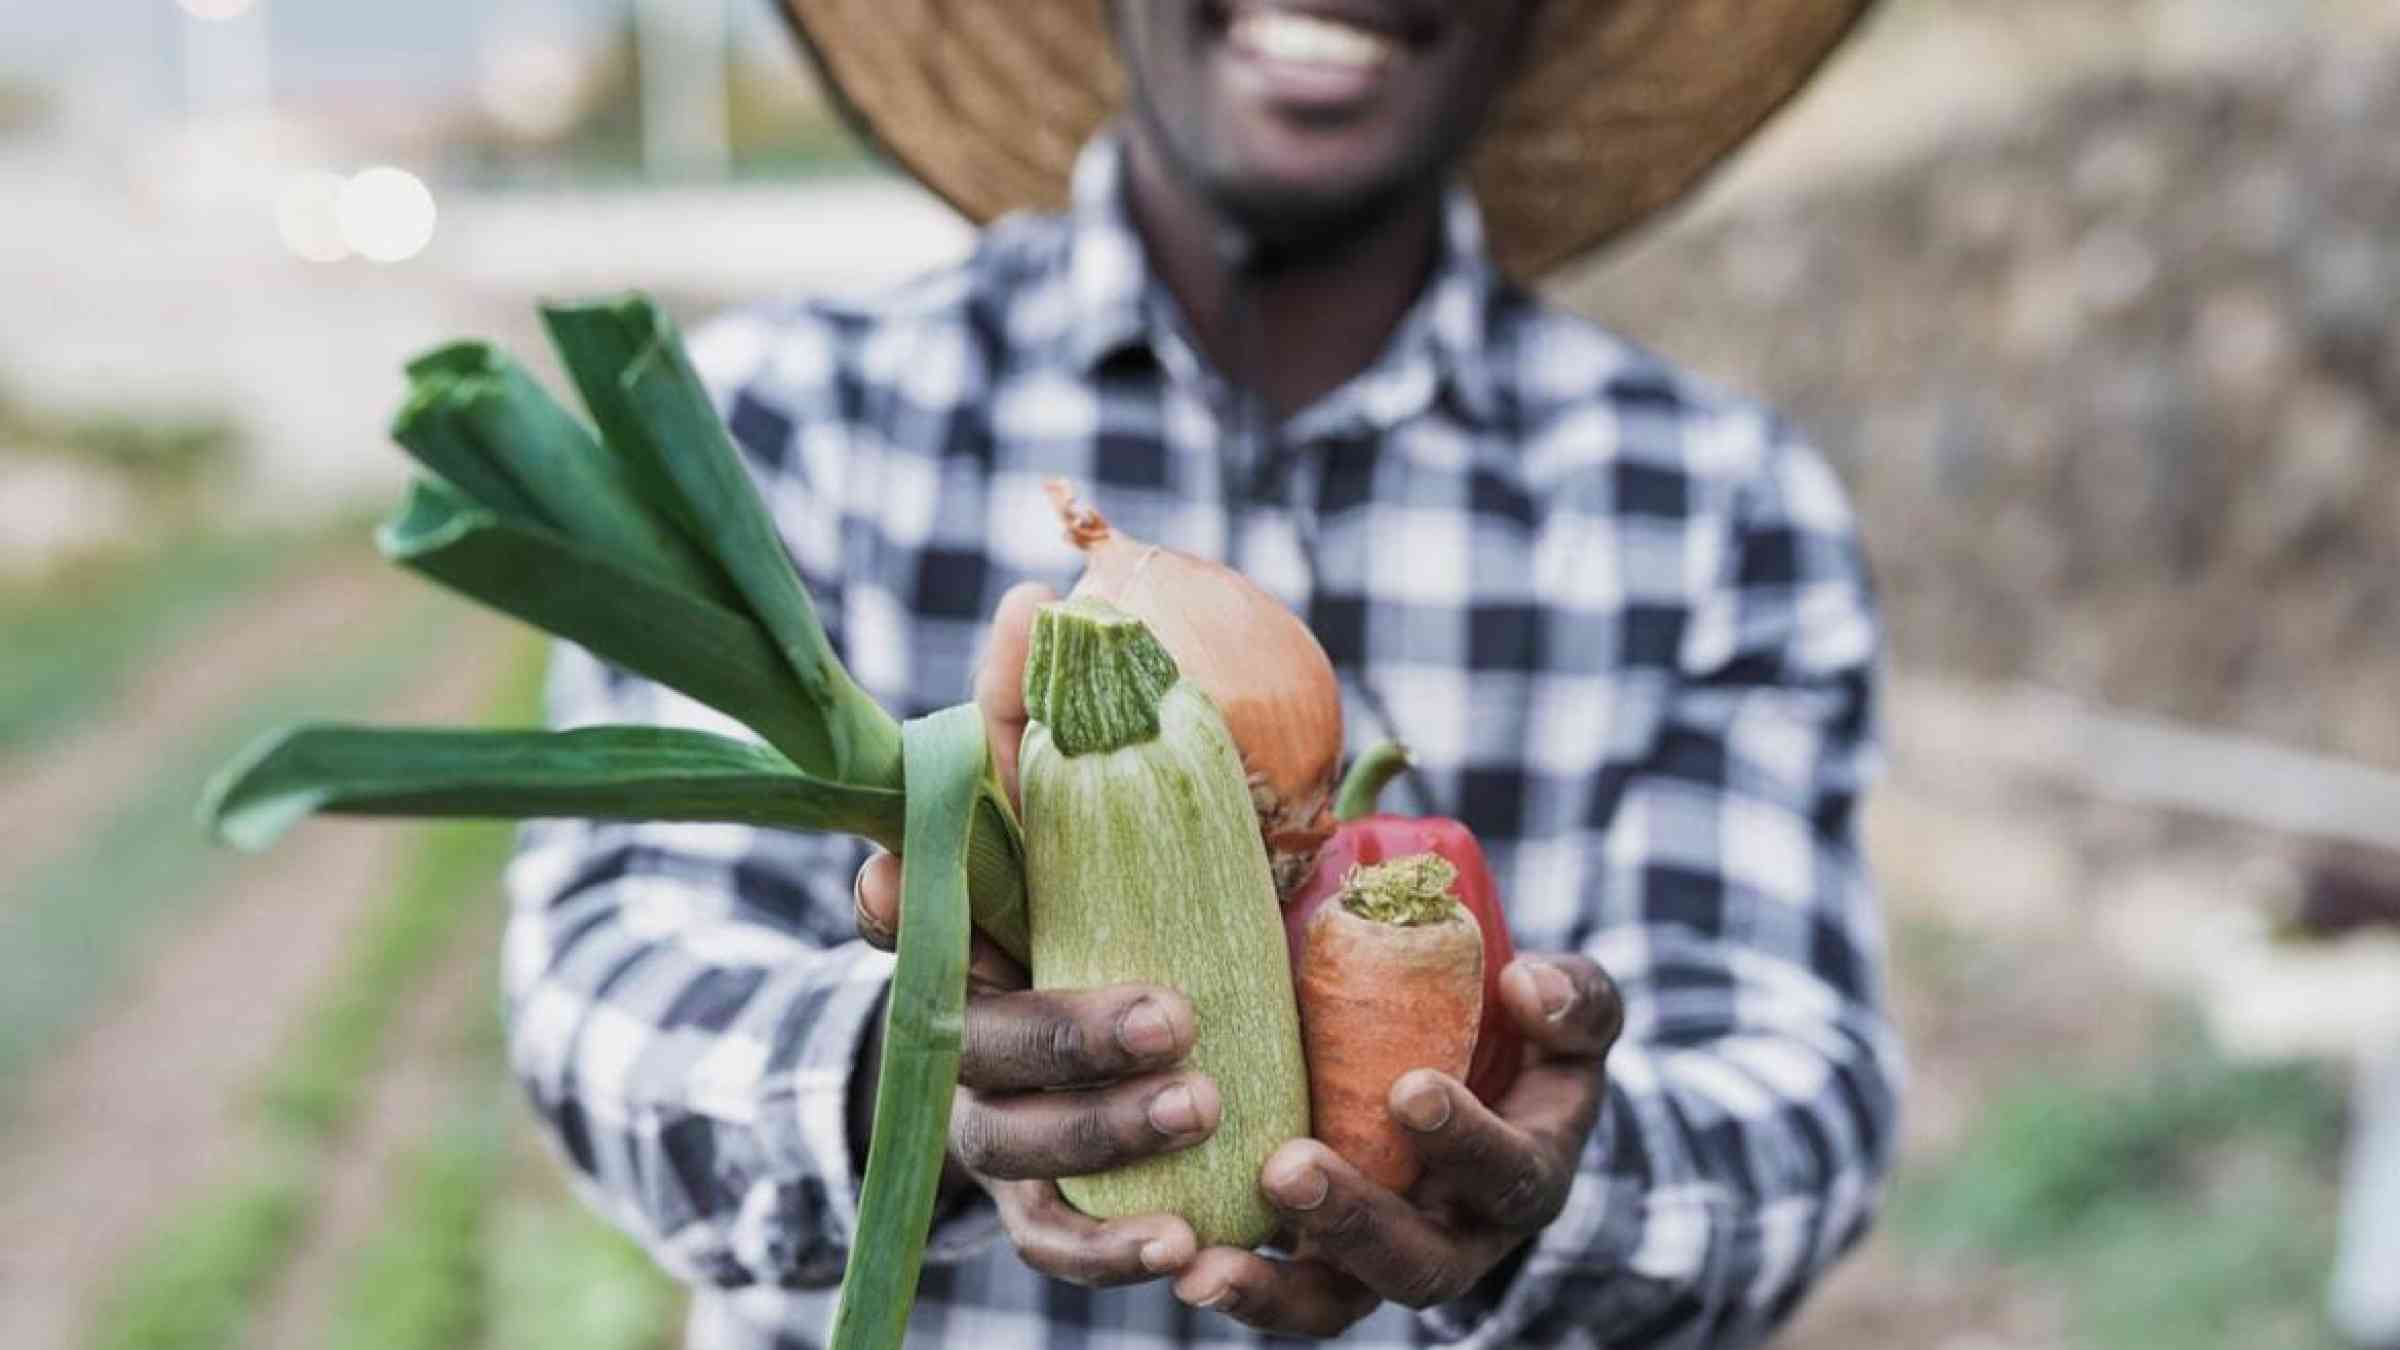 This image shows an African farmer who holds fresh vegetables from sustainable farming.